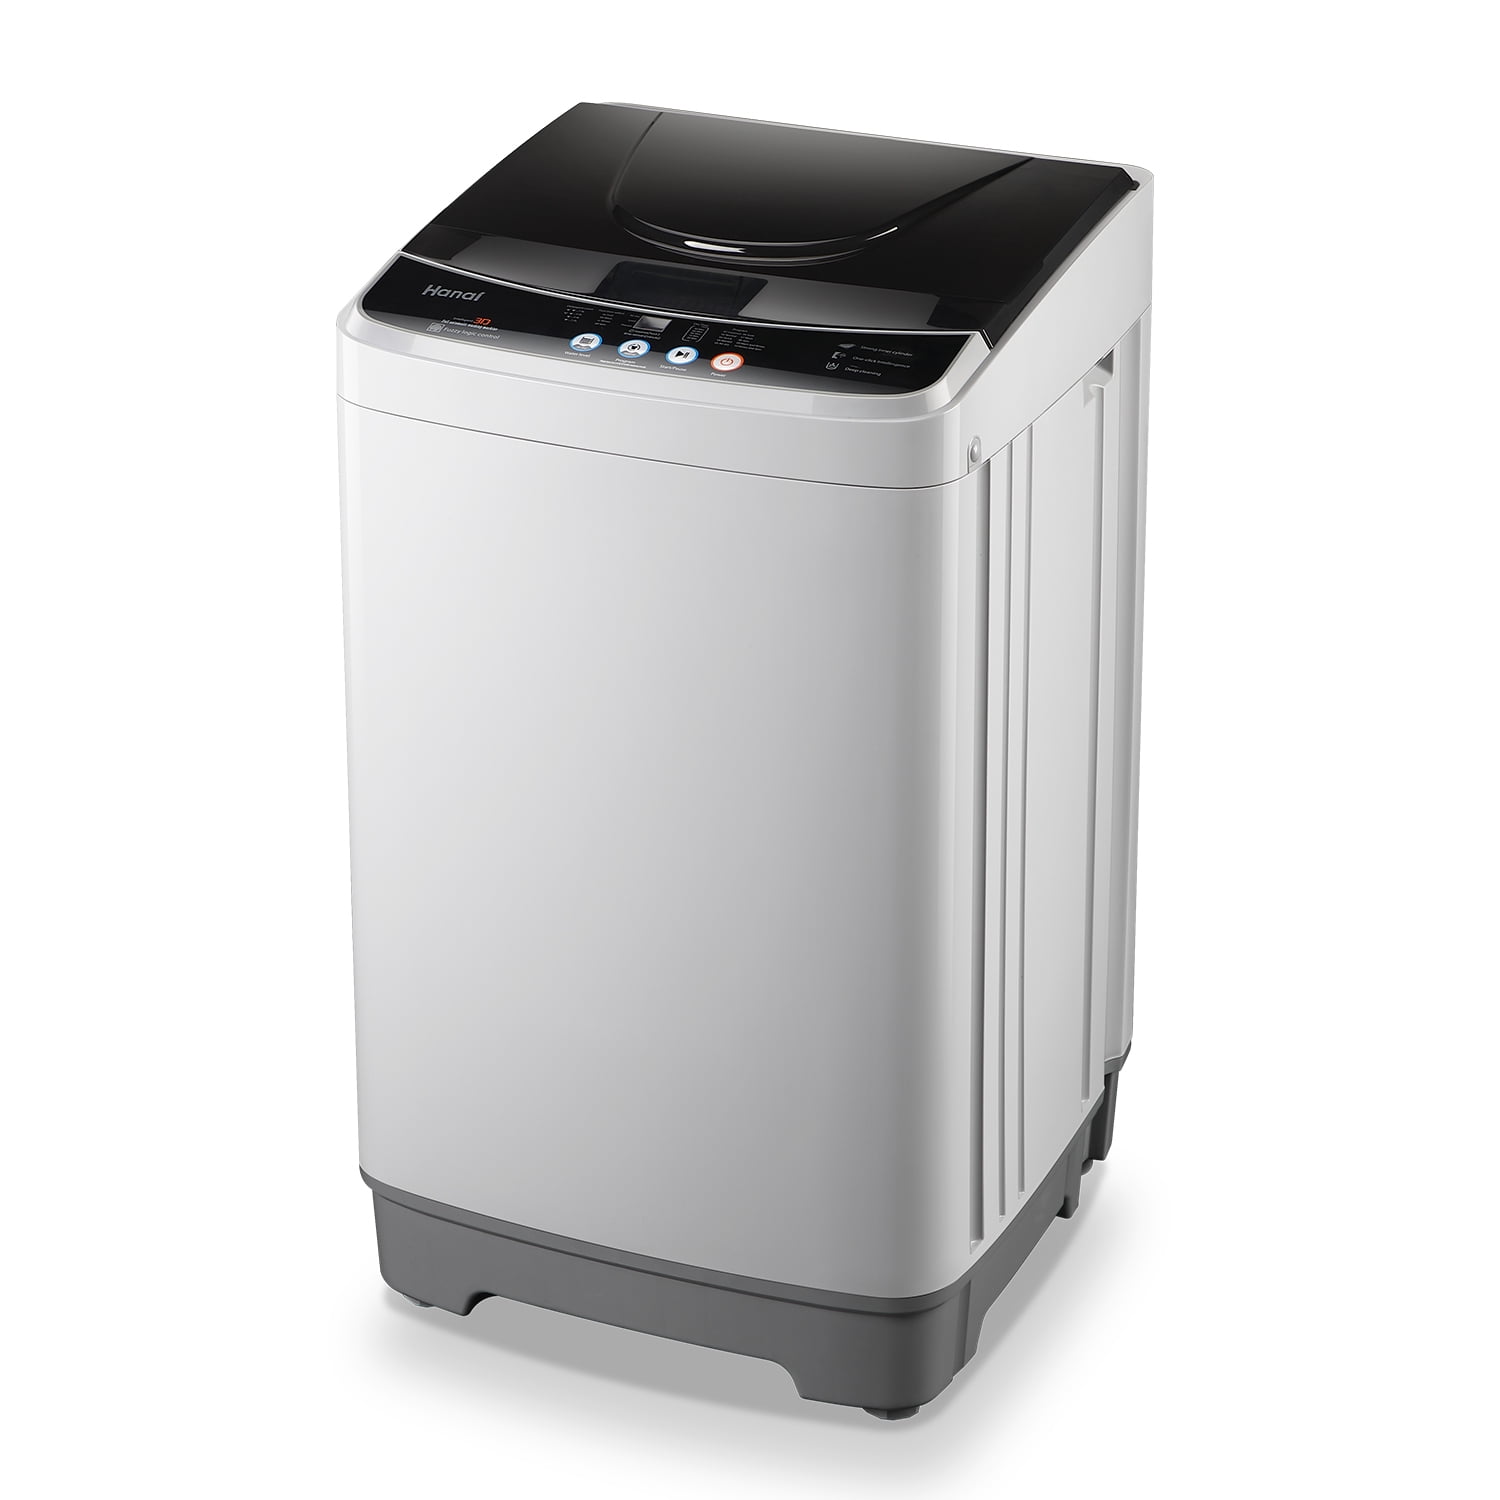 Full-Automatic Washing Machine 1.32cu.ft/10lbs Portable Compact 2 in 1